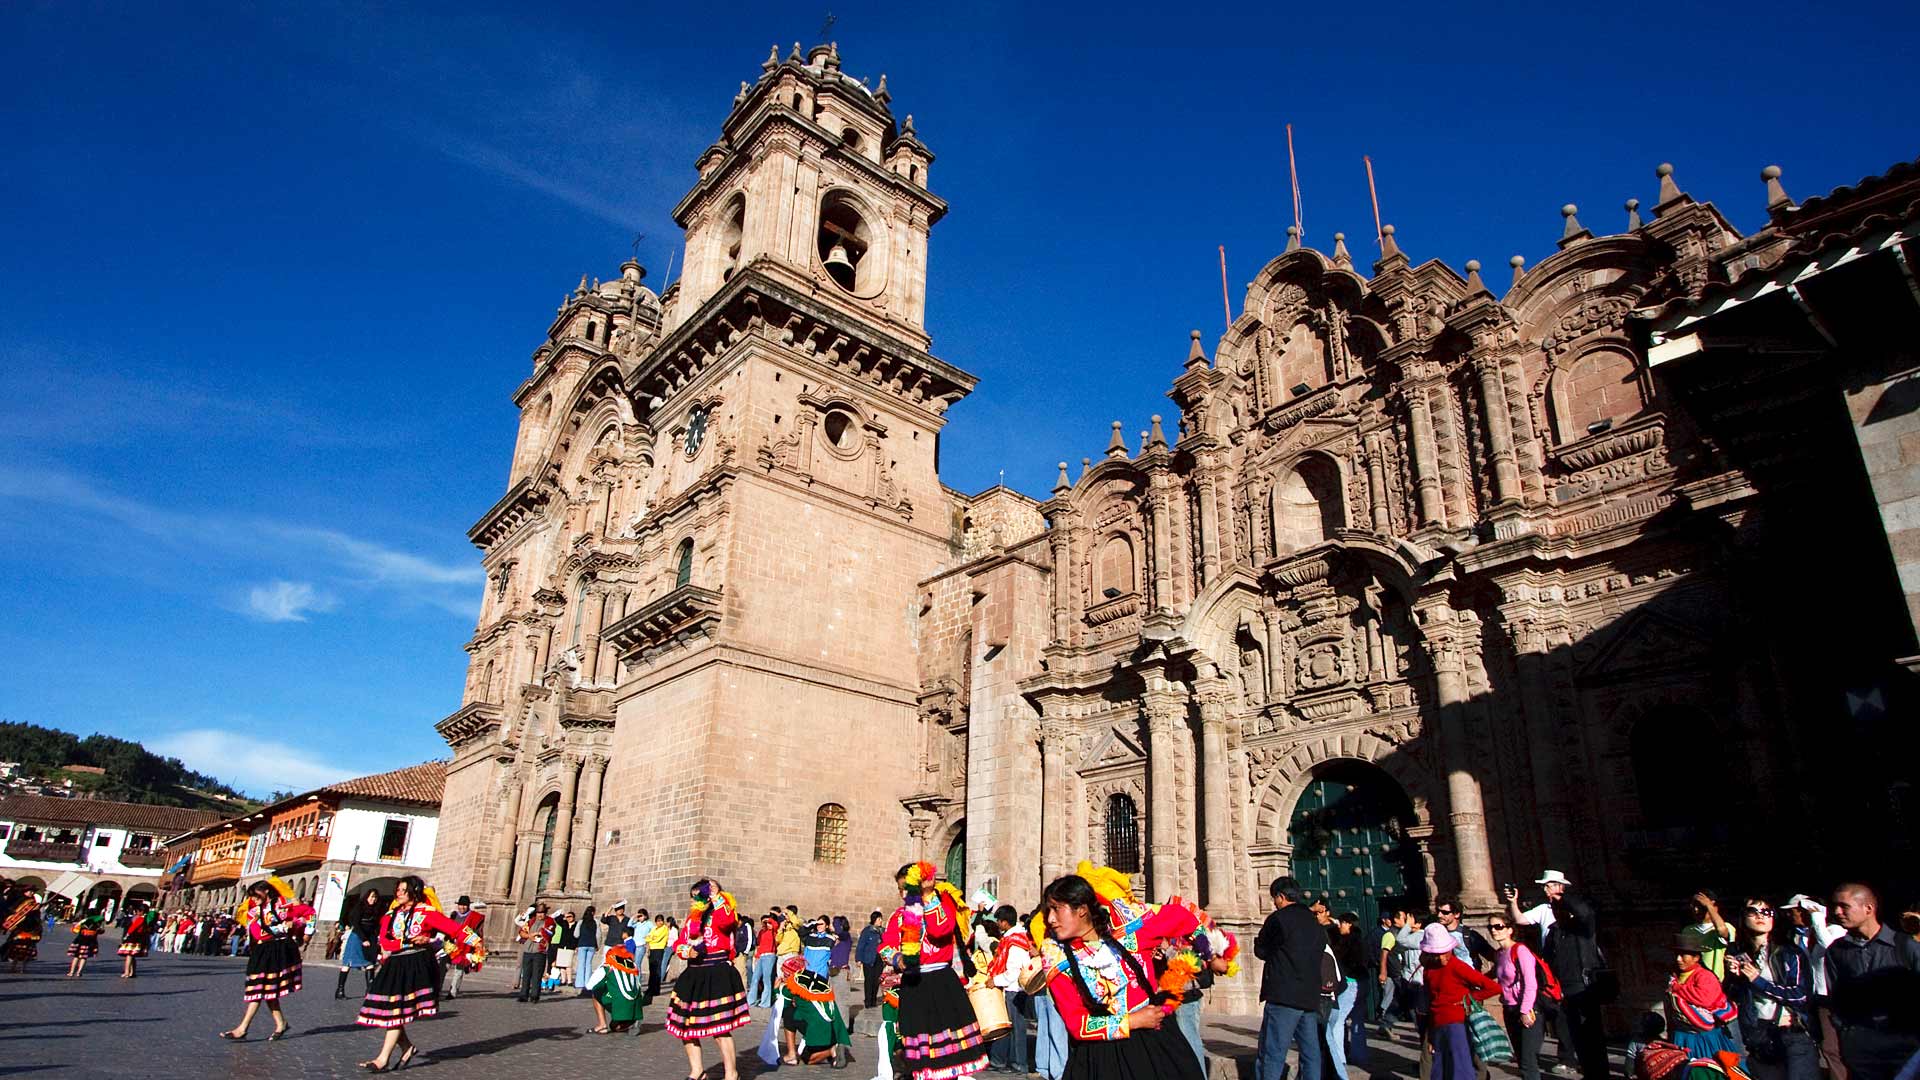 People wearing traditional dress performing a folk dance during a street festival in Cusco